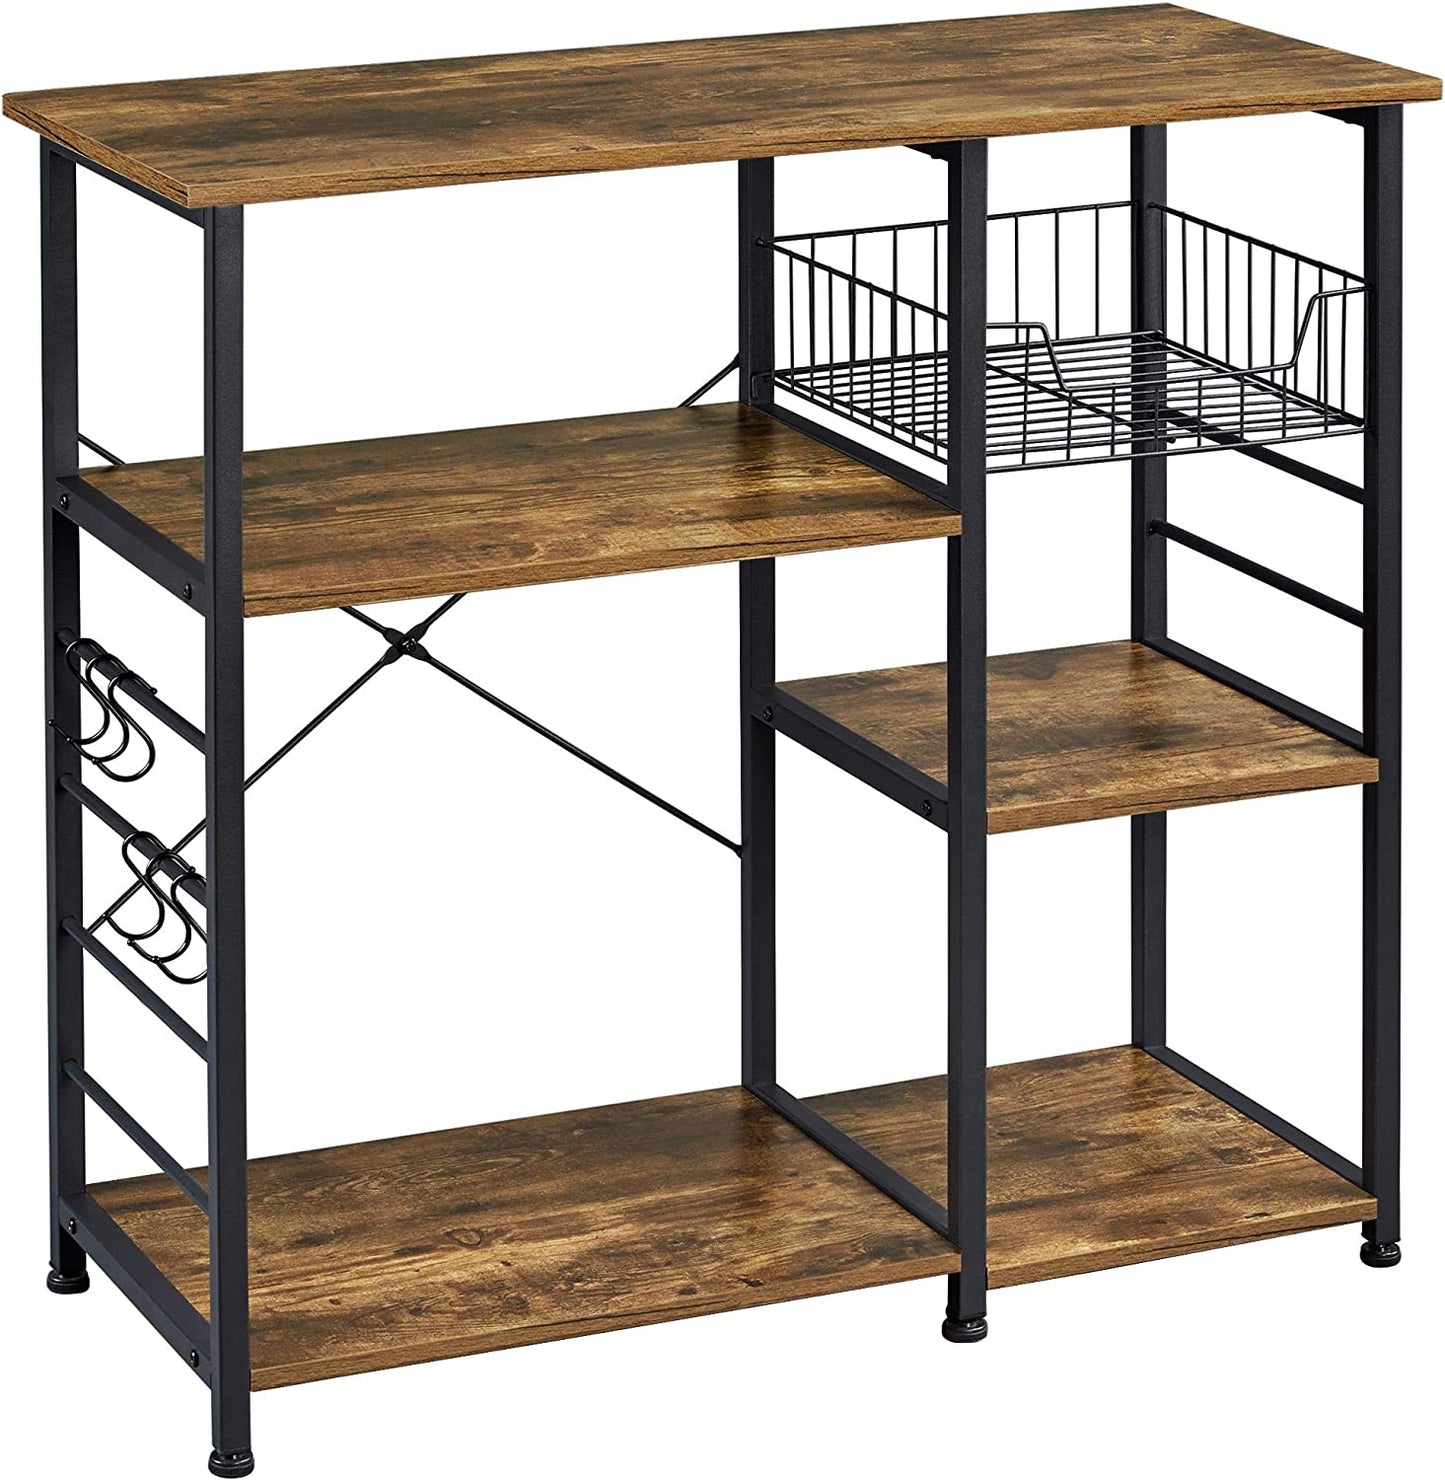 Rustic Brown 4-Tier Kitchen Baker's Rack with Wire Basket, 6 Side Hooks, and Storage Shelf for Spices, Utensils, and Food Organizing